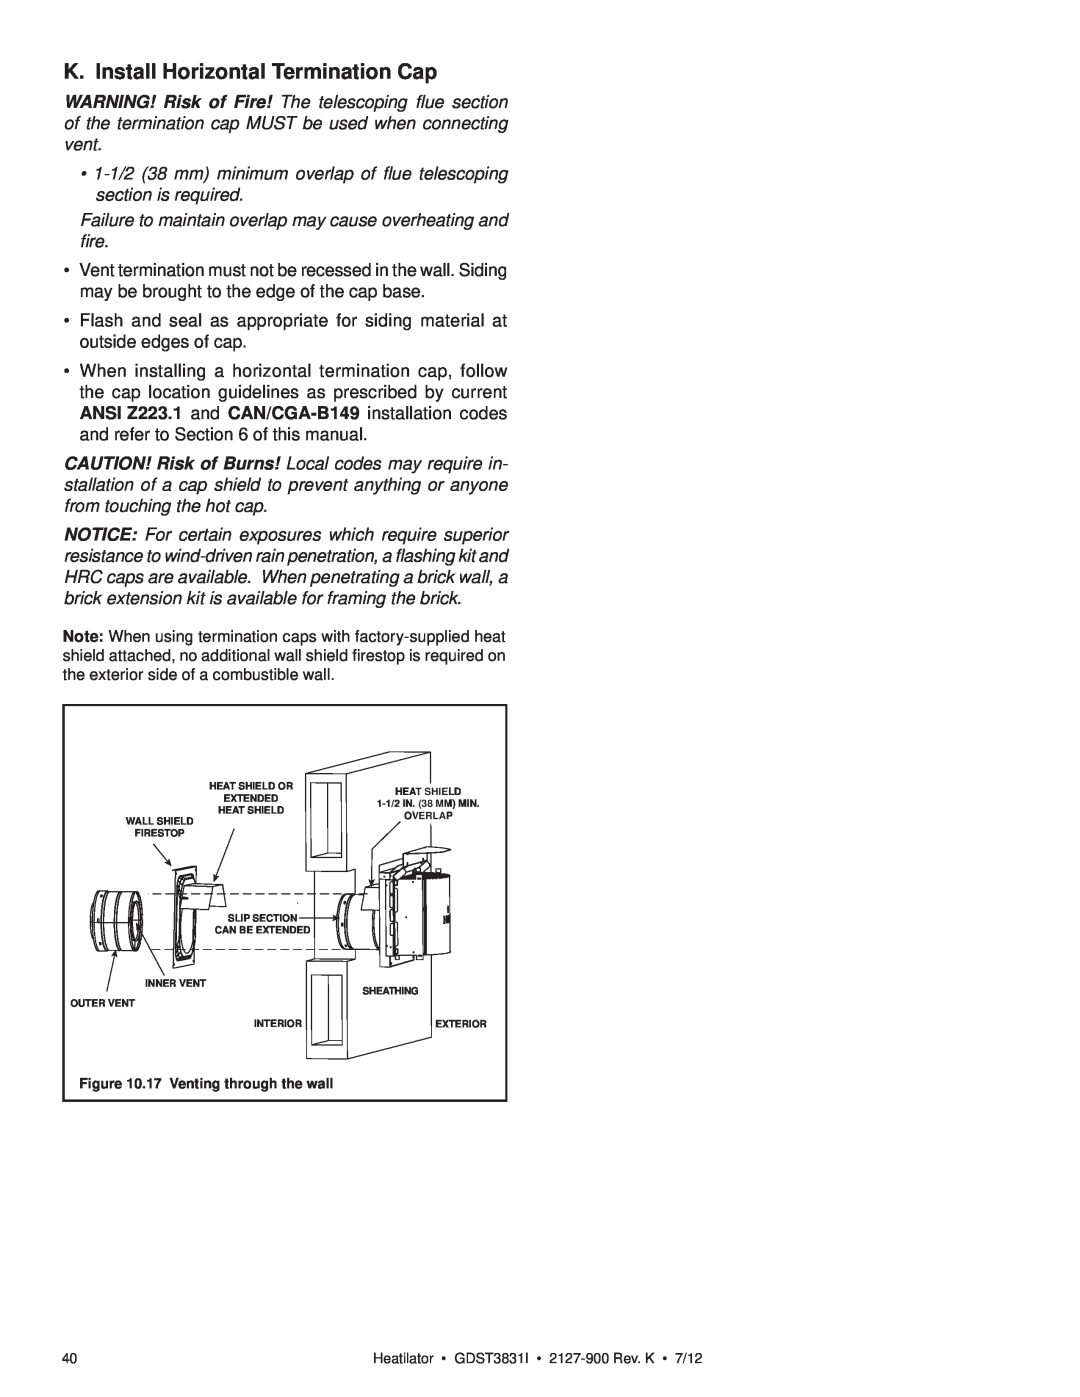 Heatiator GDST3831I owner manual K. Install Horizontal Termination Cap, 17 Venting through the wall 